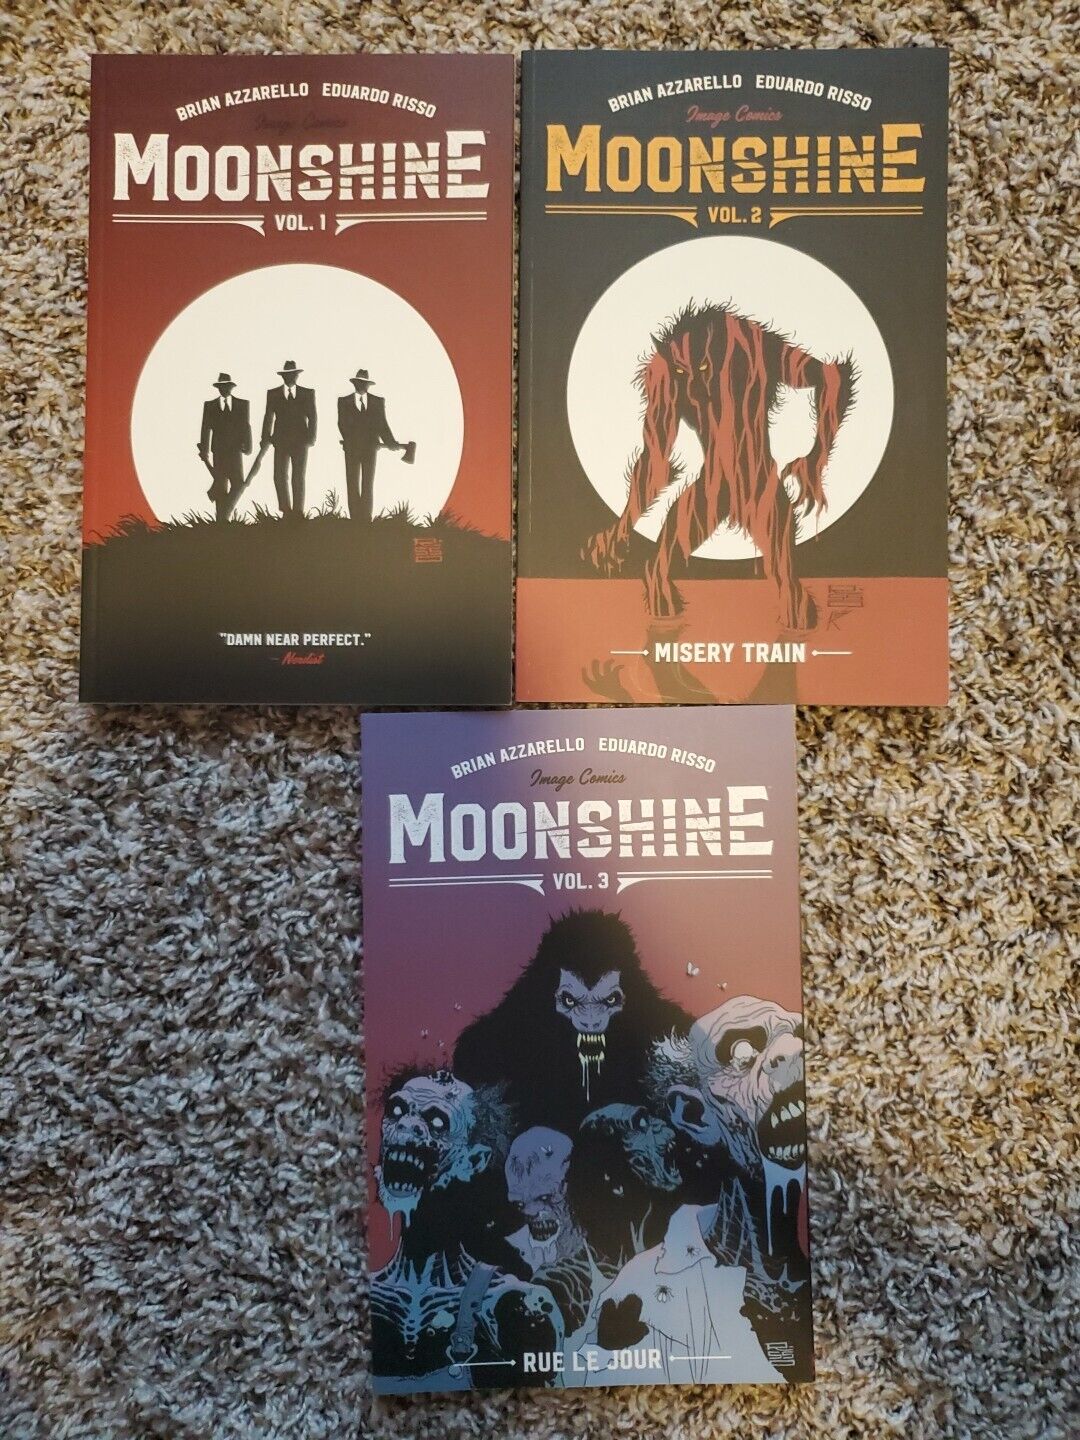 Moonshine Volumes 1-3 Azzarello Risso Collects Issues #1-17